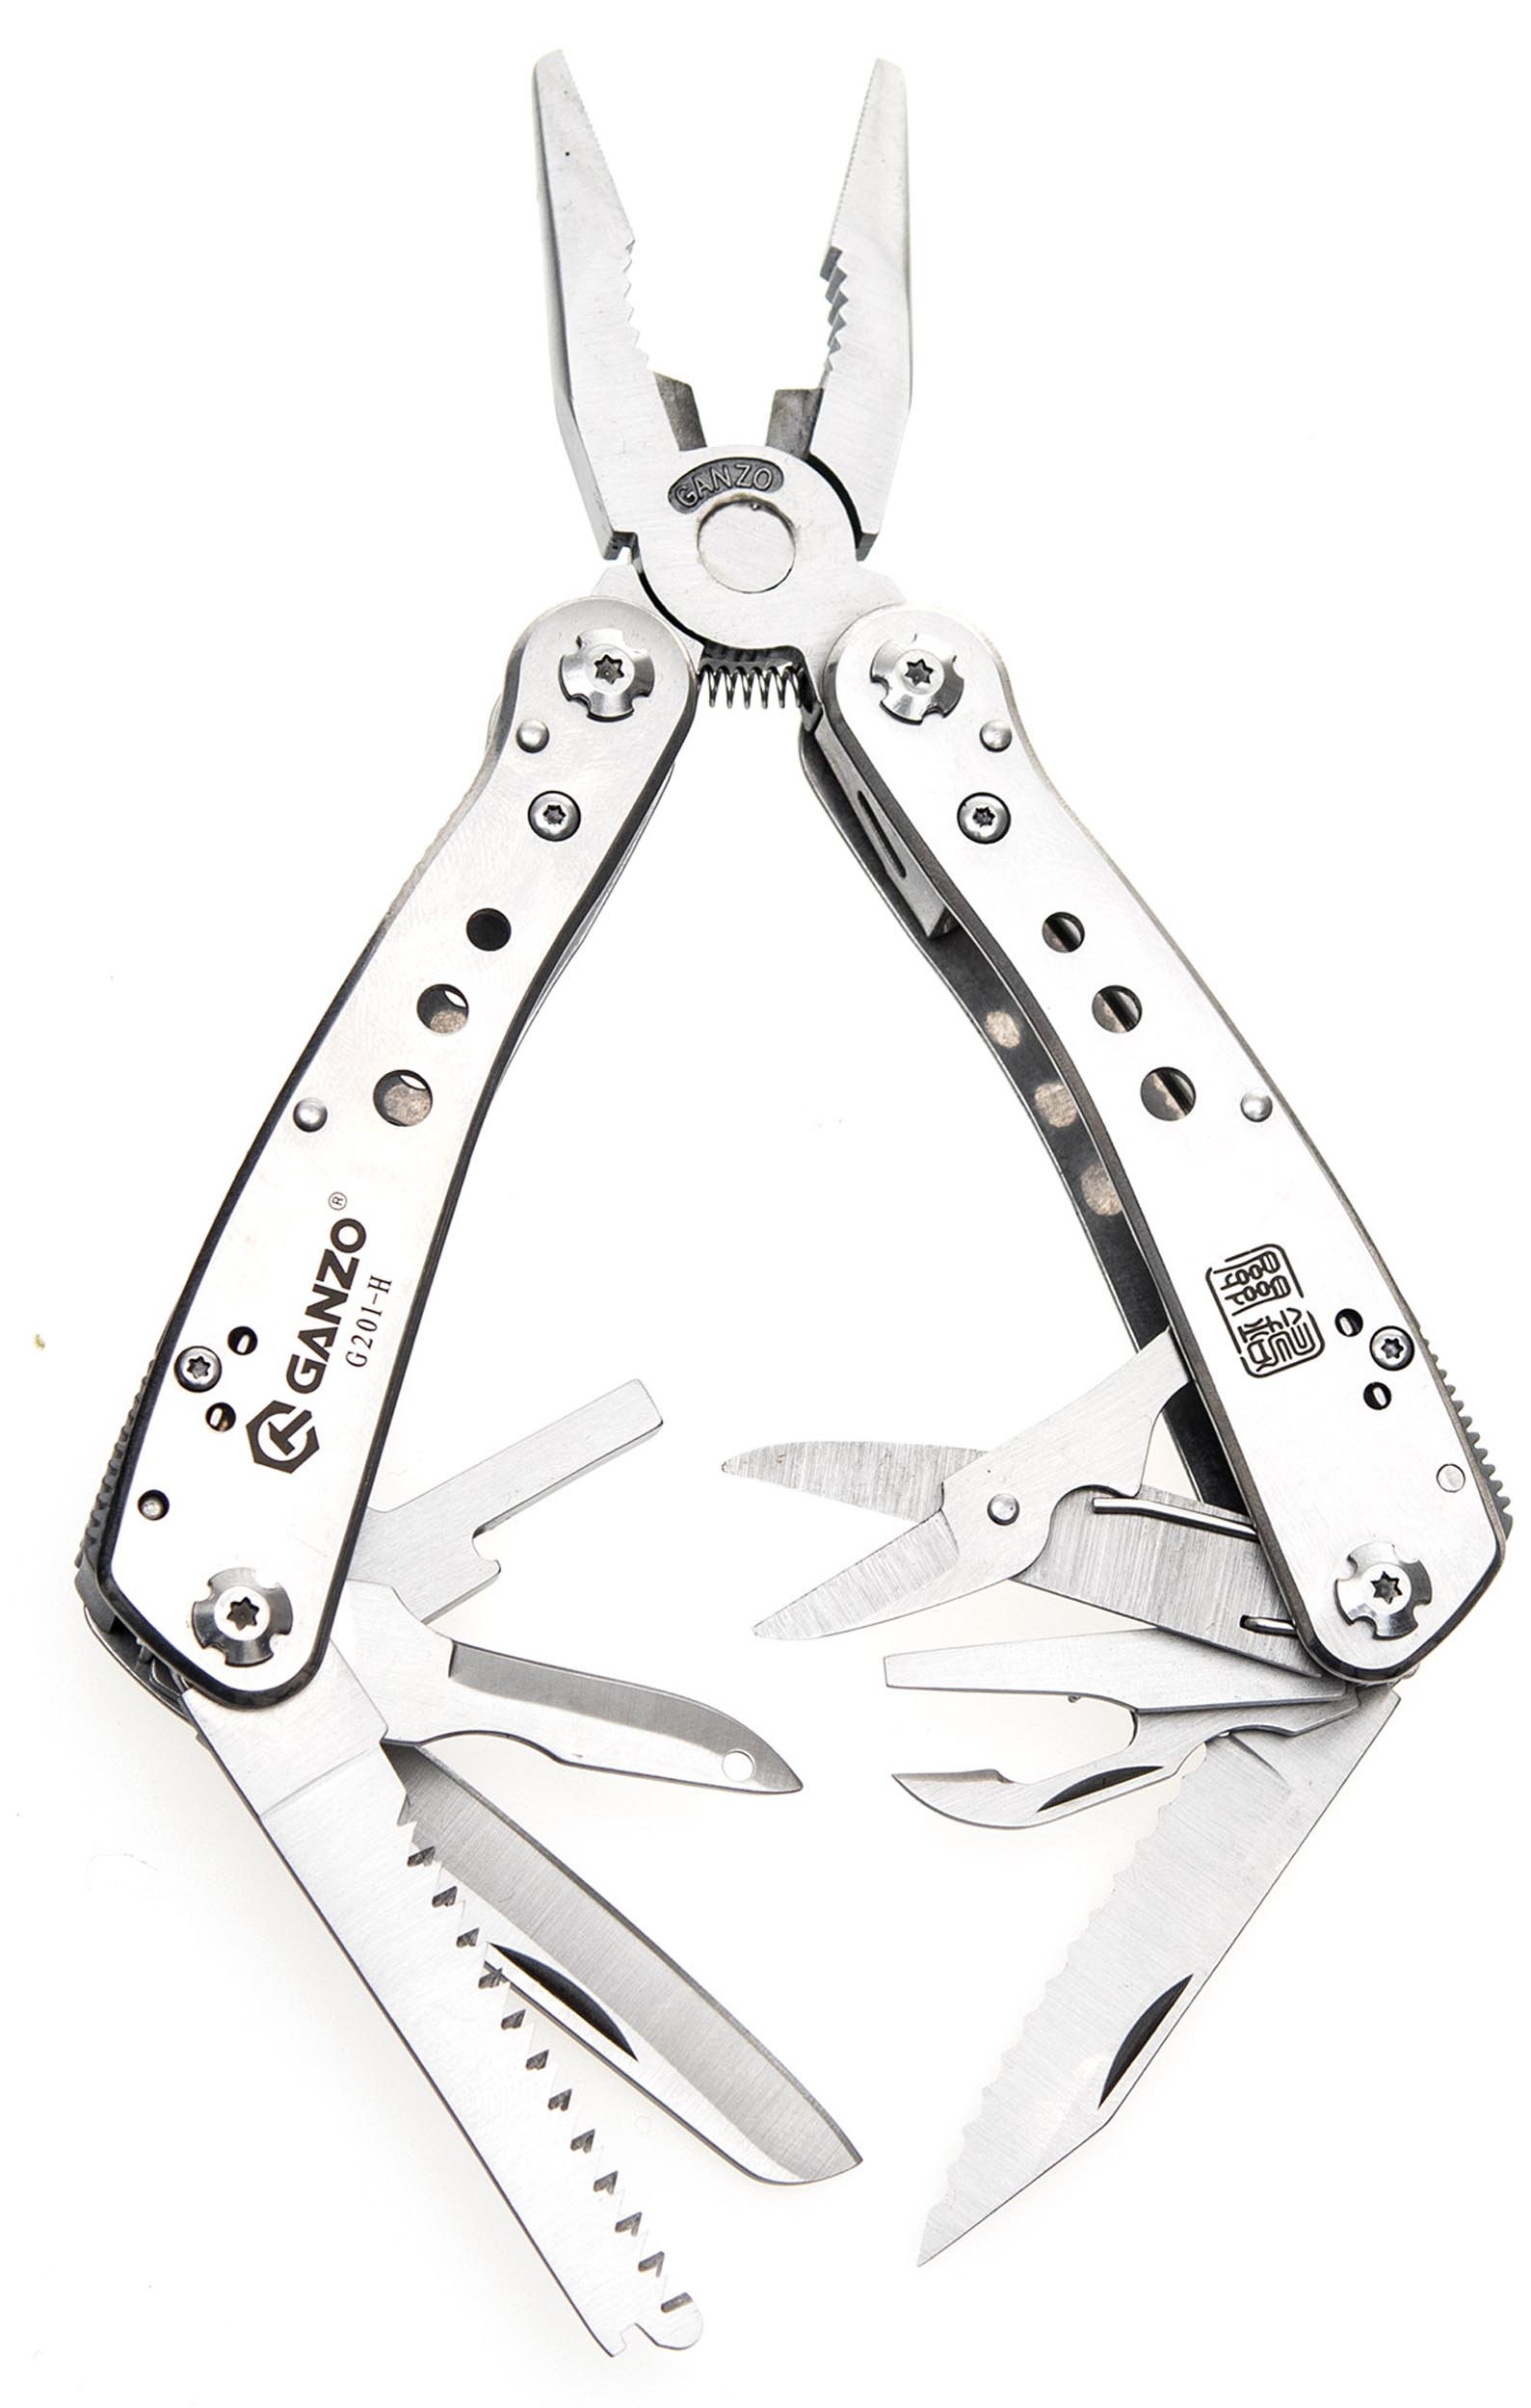 Pince Multi-Fonctions Mini Multitool 21 Outils - Ganzo